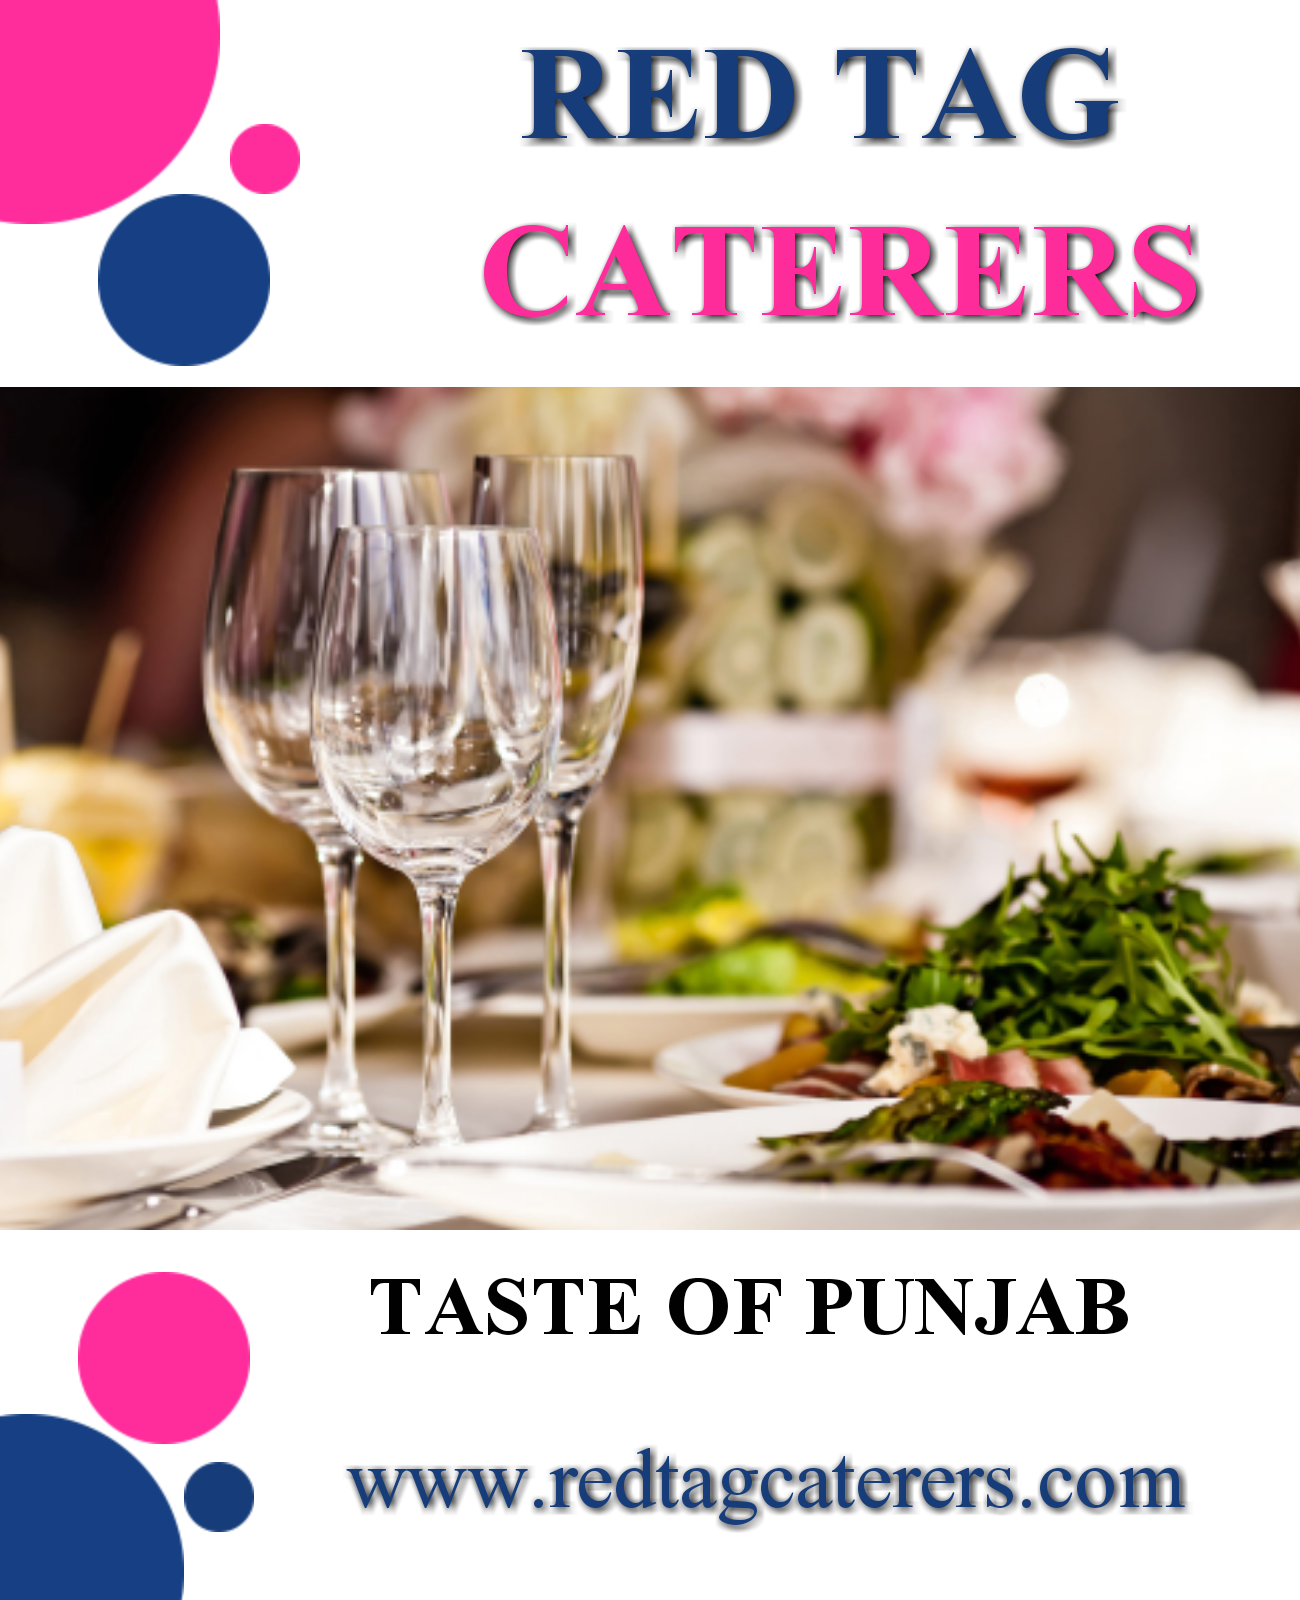 best caterers in Ludhiana with hygienic food  | Red Tag Caterers | Best caterers in Ludhiana with hygienic food, best caterers in Ludhiana, best wedding caterers in Ludhiana, best corporate caterers in Ludhiana,  - GL44311